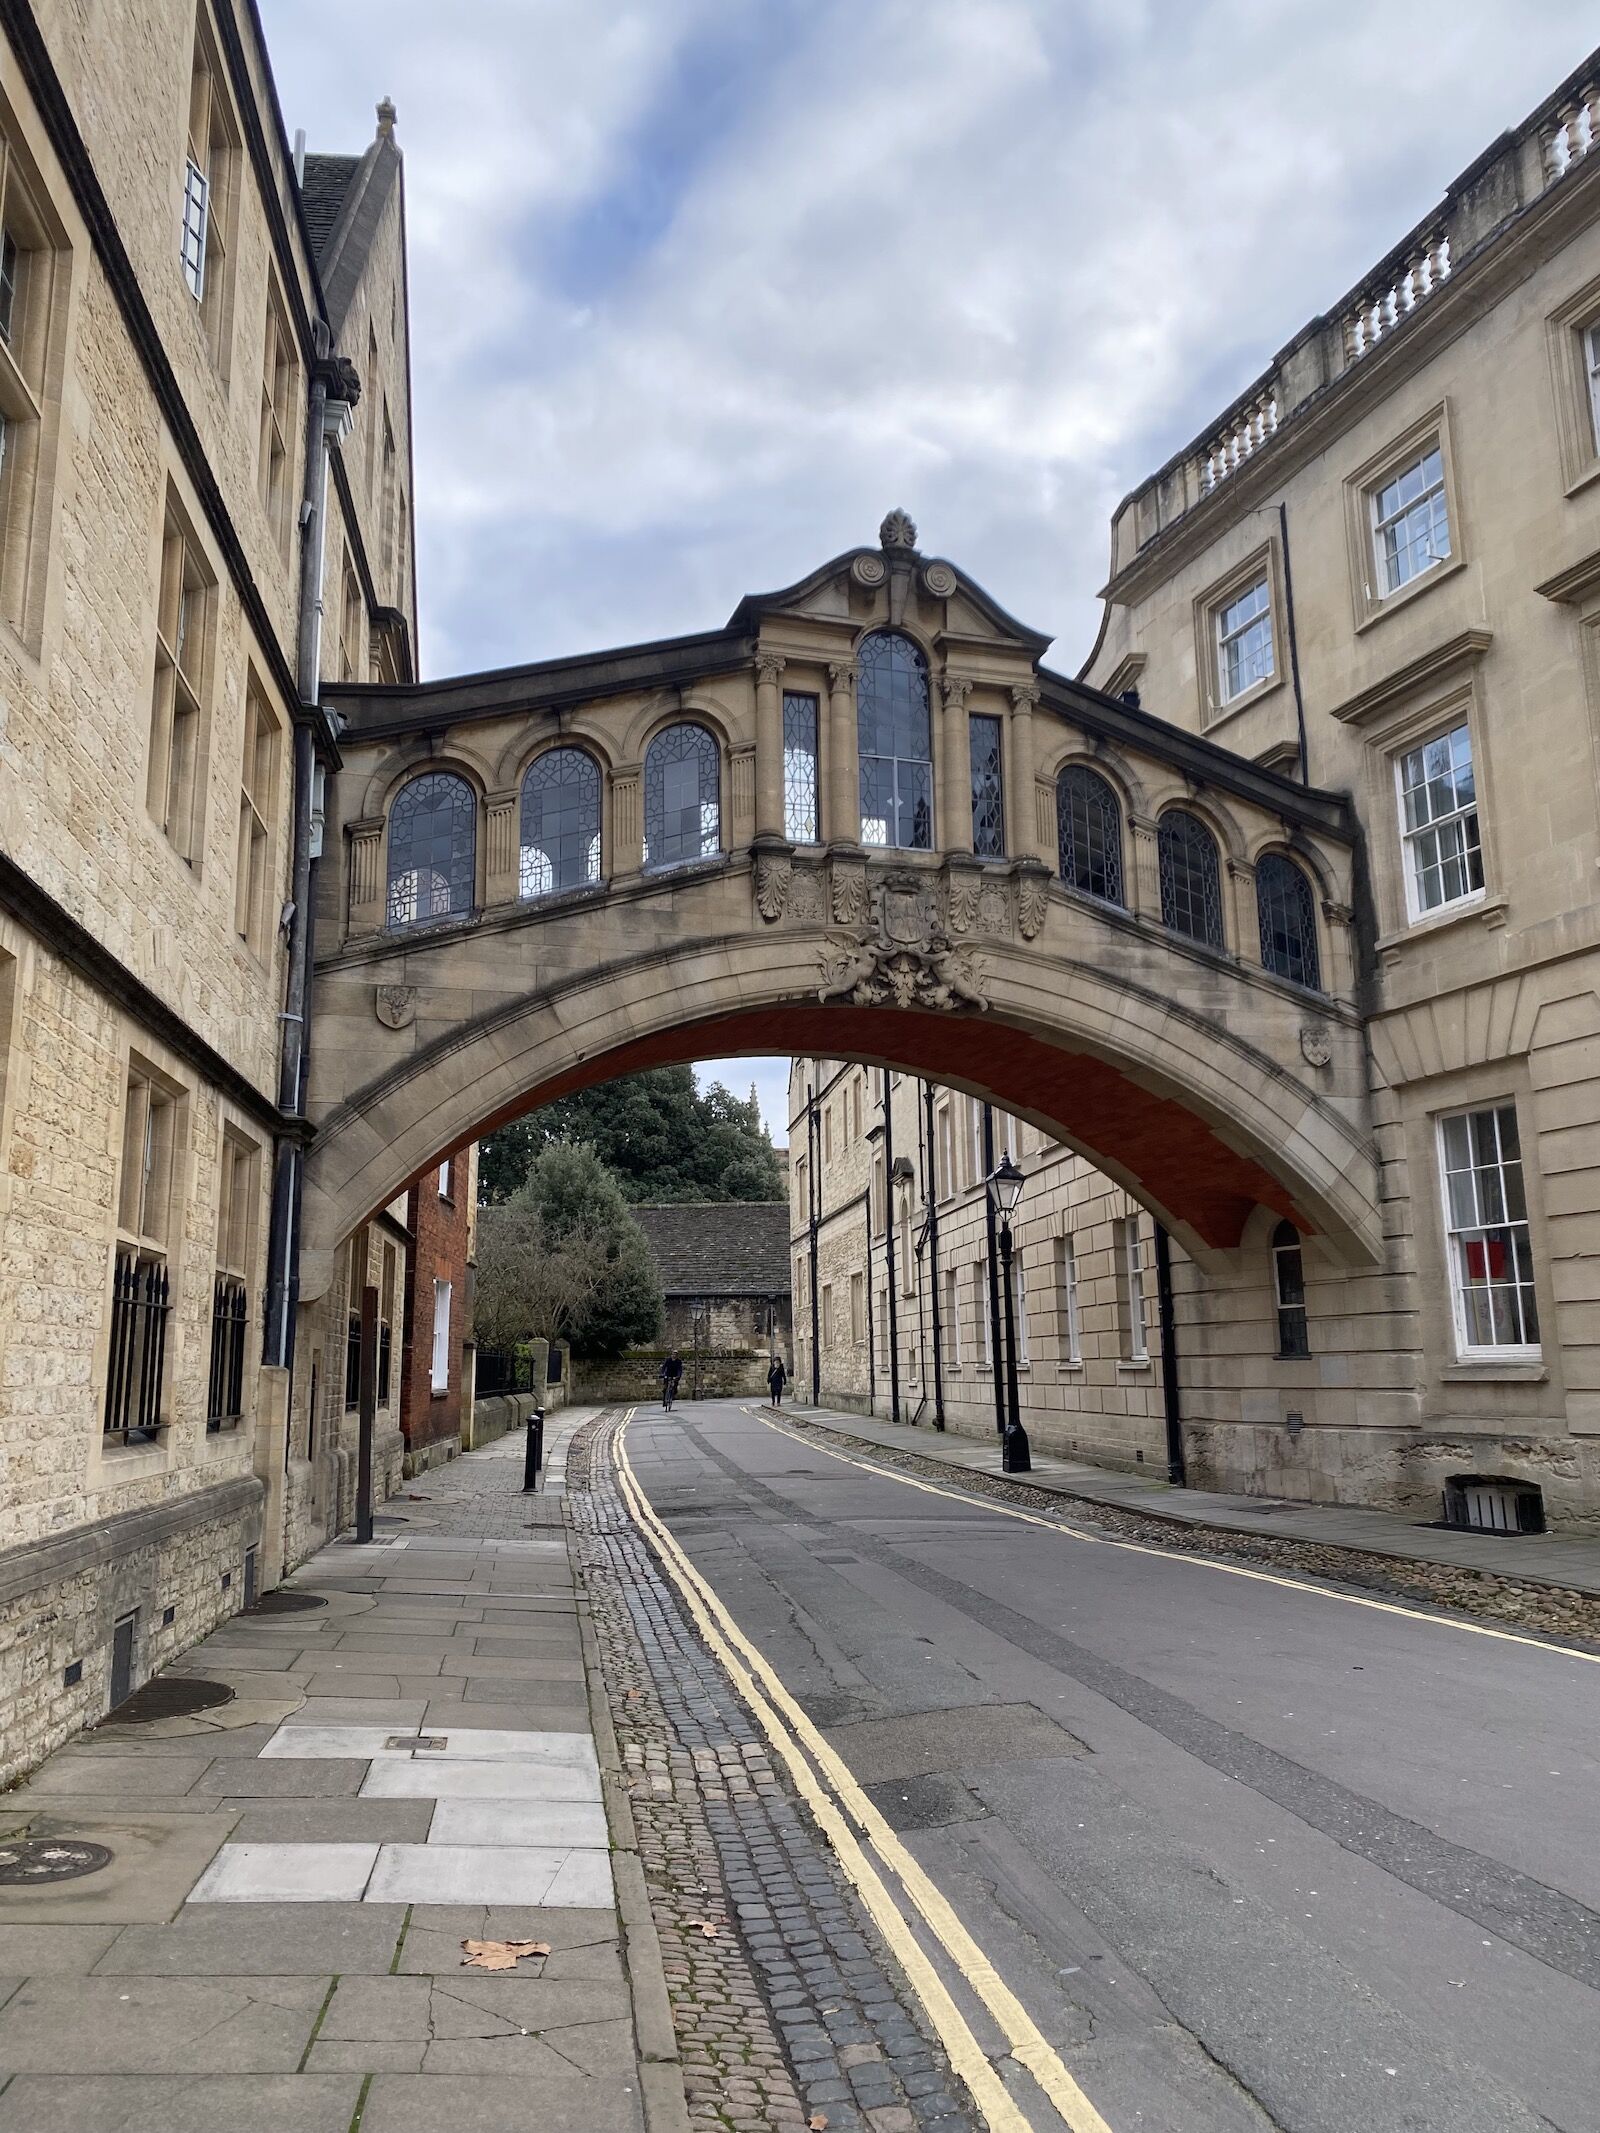 Things to do in Oxford, England: The Bridge of Sighs